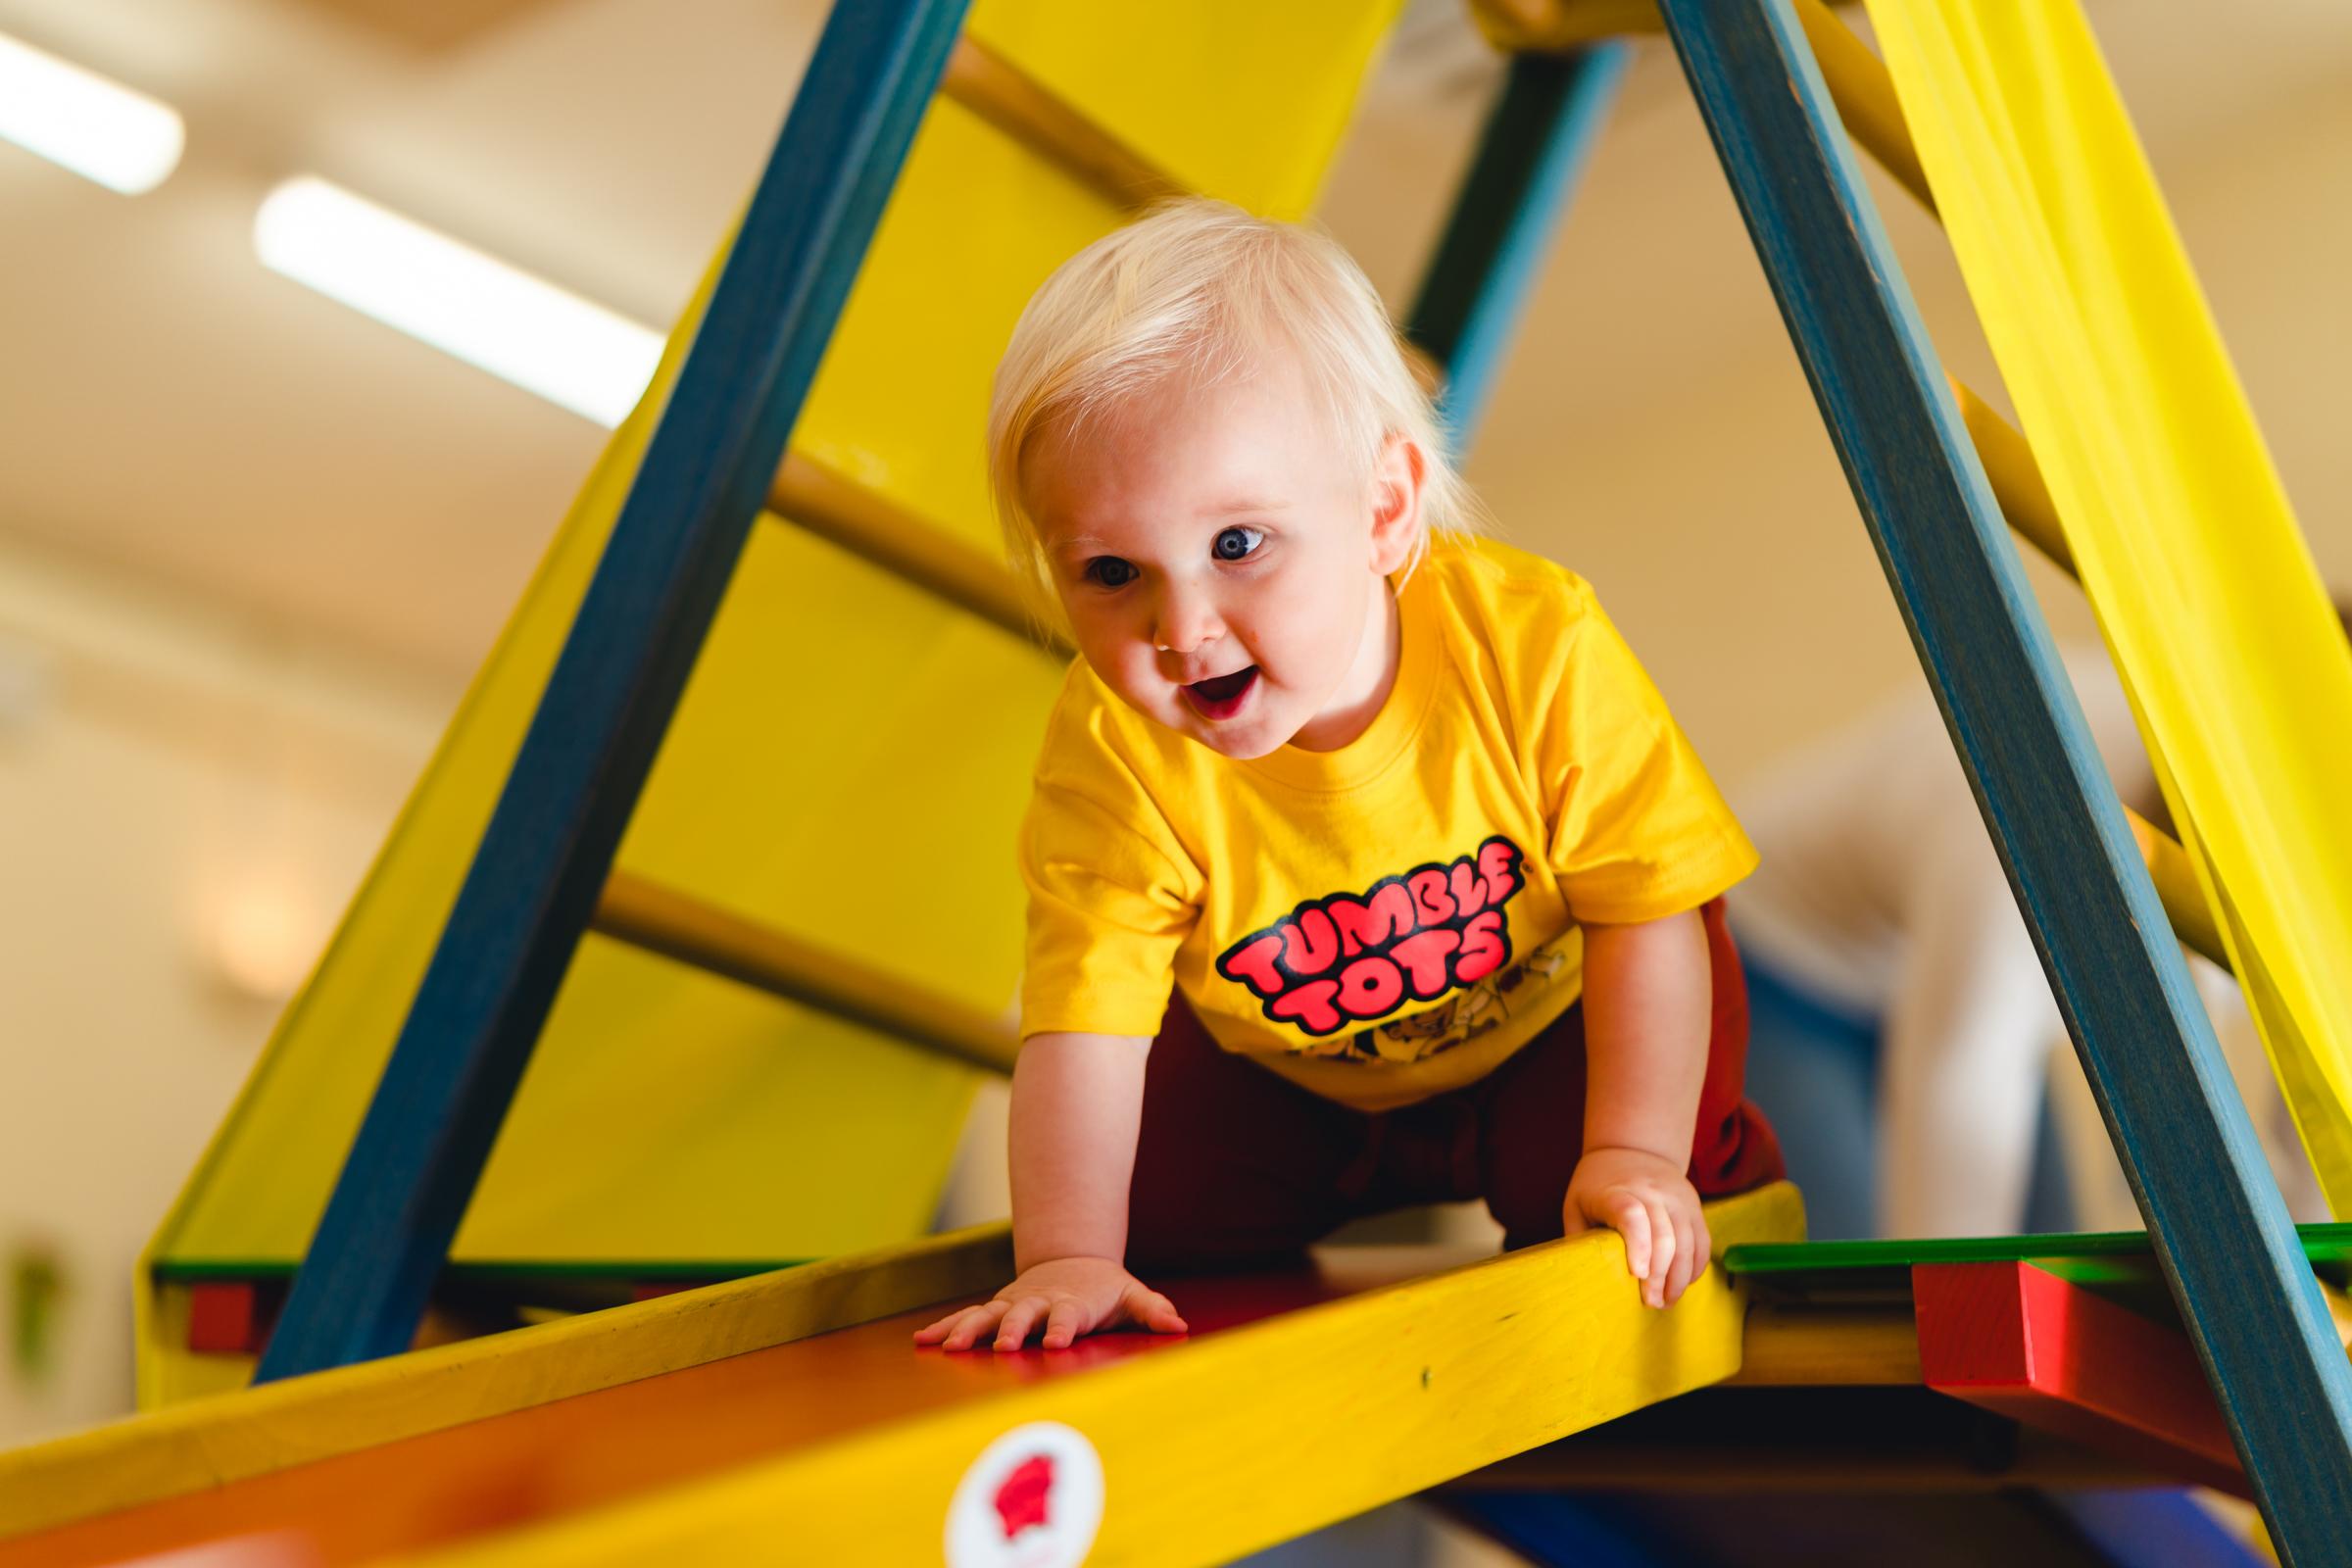 The progressiv play programme is designed to develop childrens physical skills with a focus on agility, balance, climbing and co-ordination (Image: Philip Dignum)